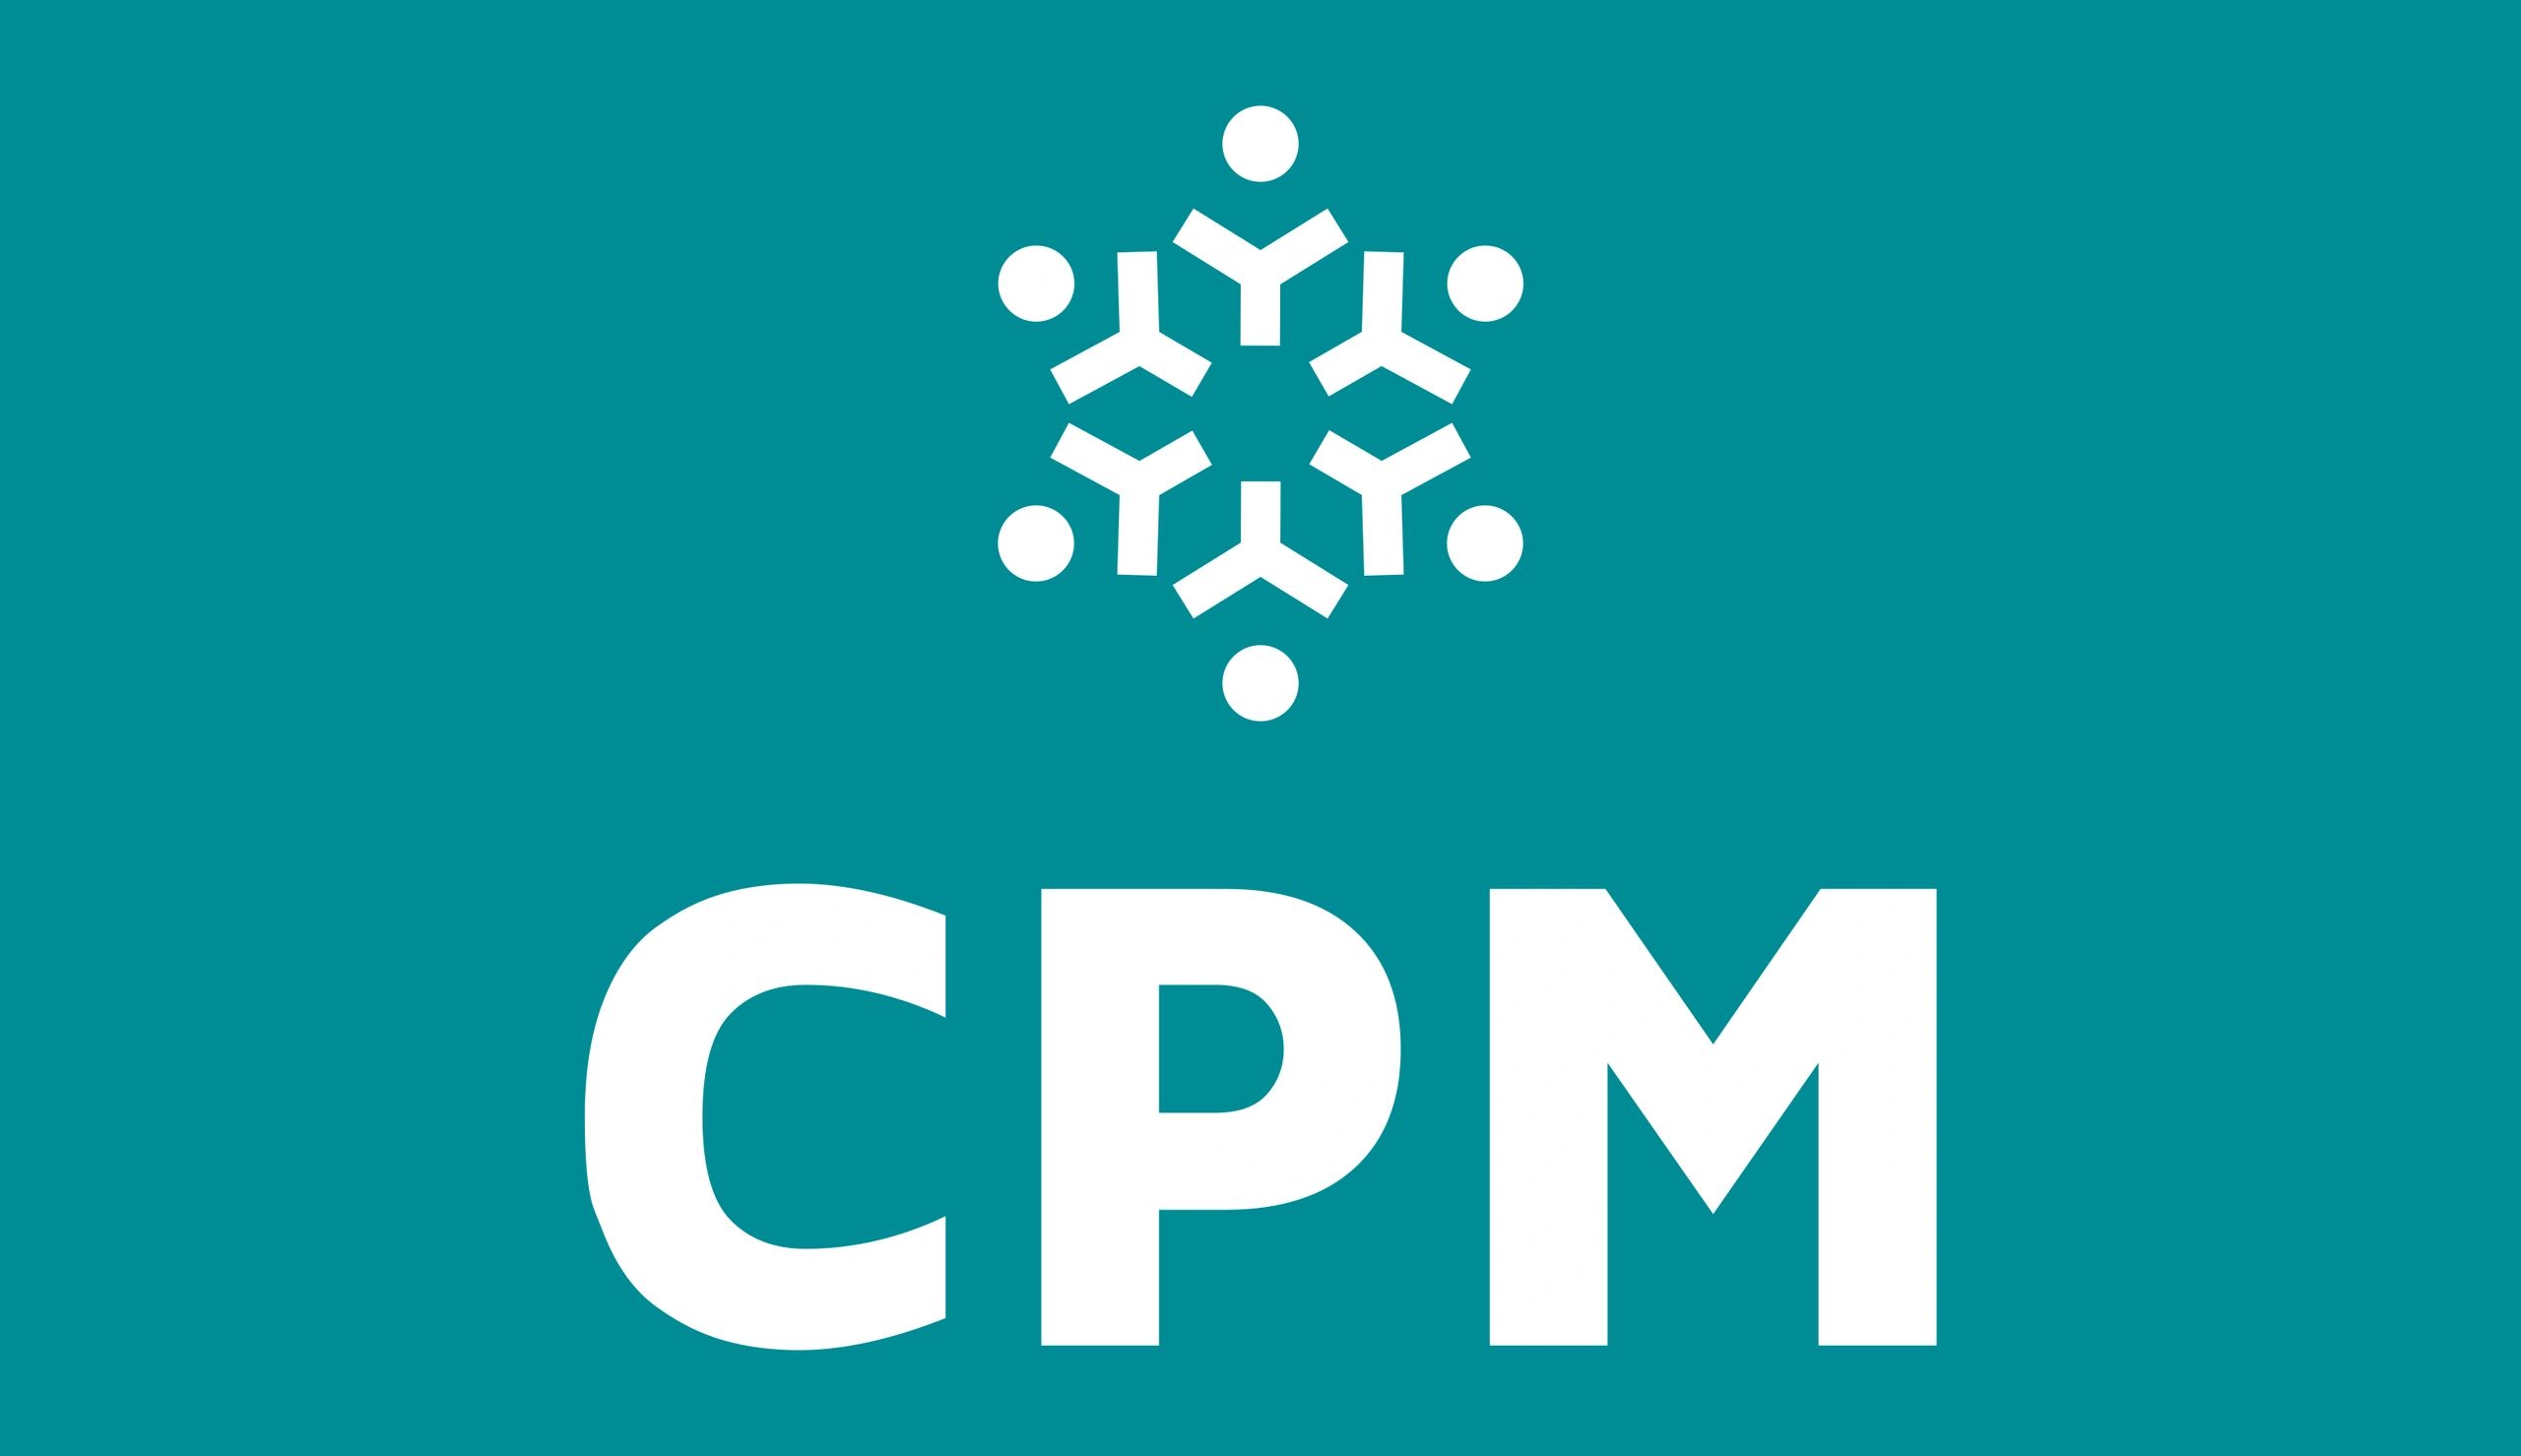 The letters CPM with an Icon above resembling a snow flake symbolizing the unique nature of everyone